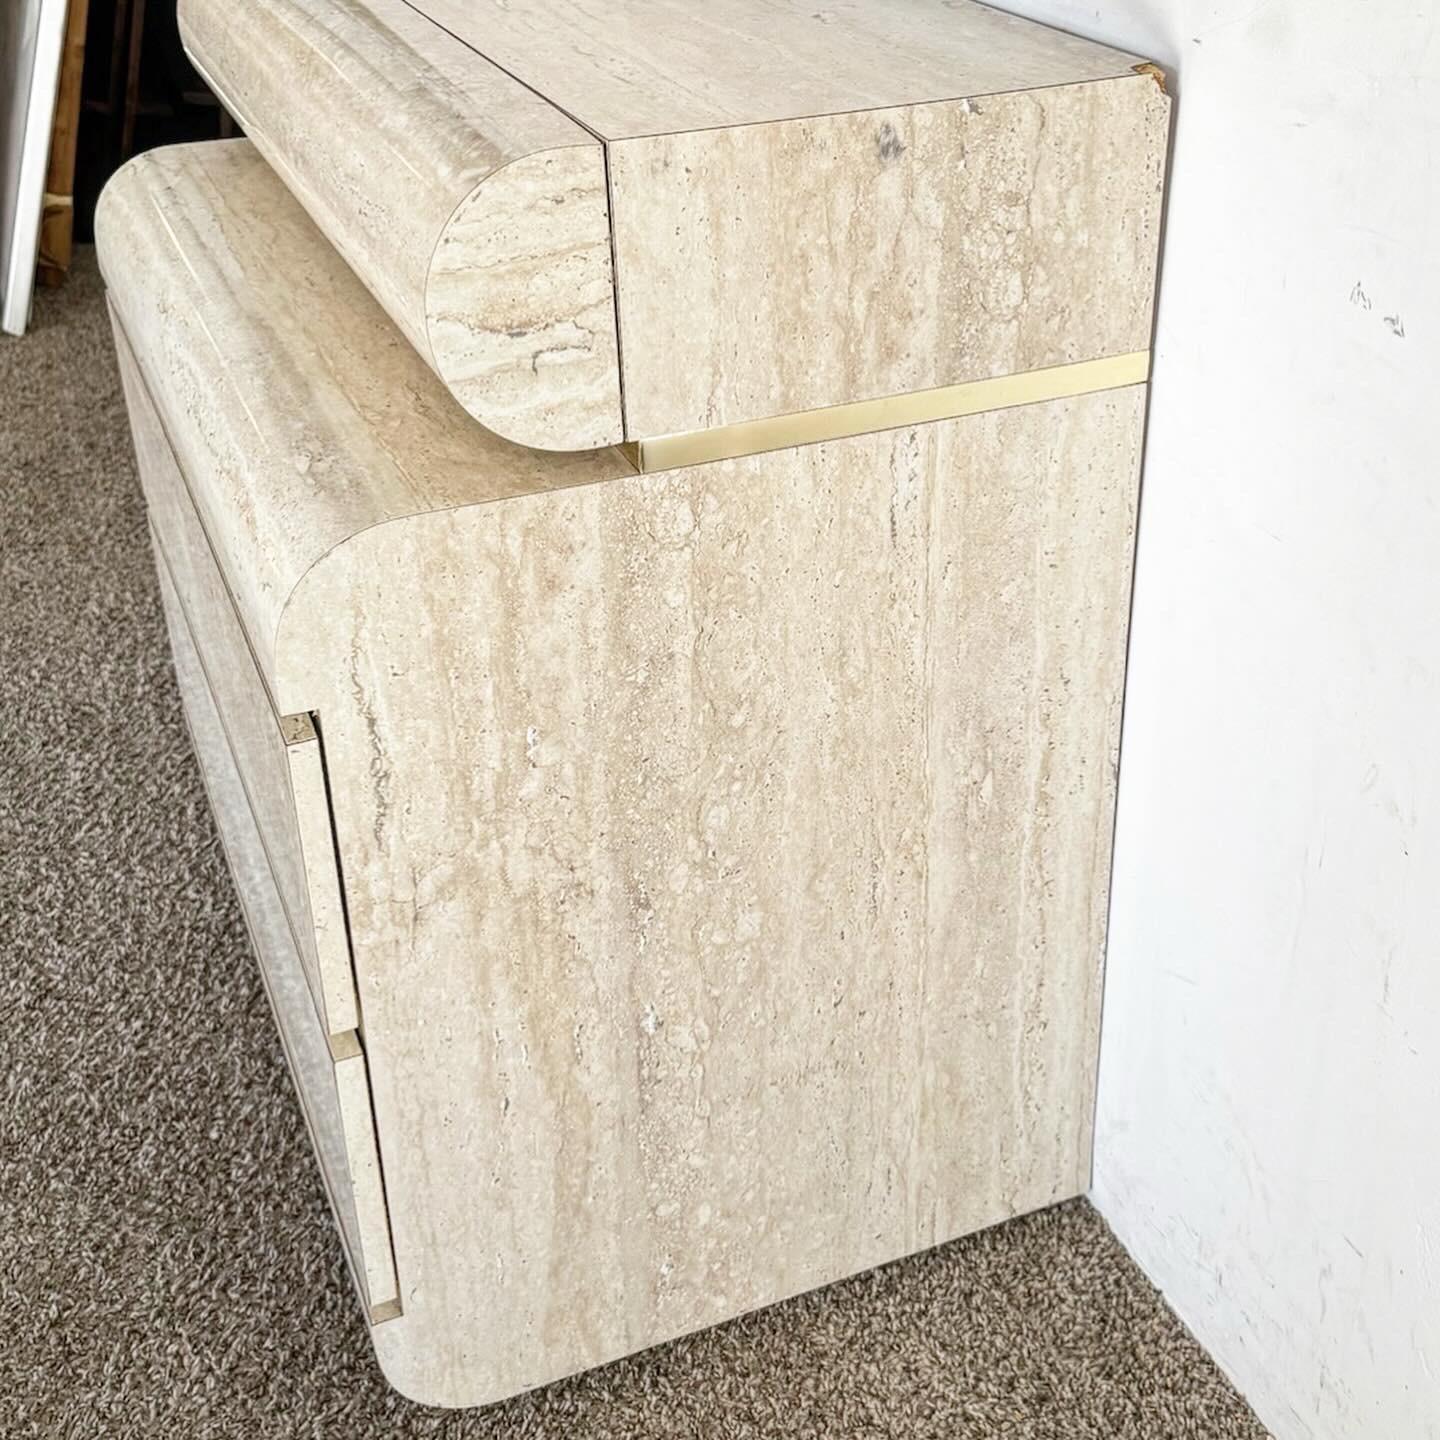 The Postmodern Bullnose Faux Travertine Laminate Chest of Drawers offers a blend of modern sophistication and functionality. Its sleek postmodern design, featuring smooth bullnose edges and luxurious faux travertine laminate, adds elegance to any